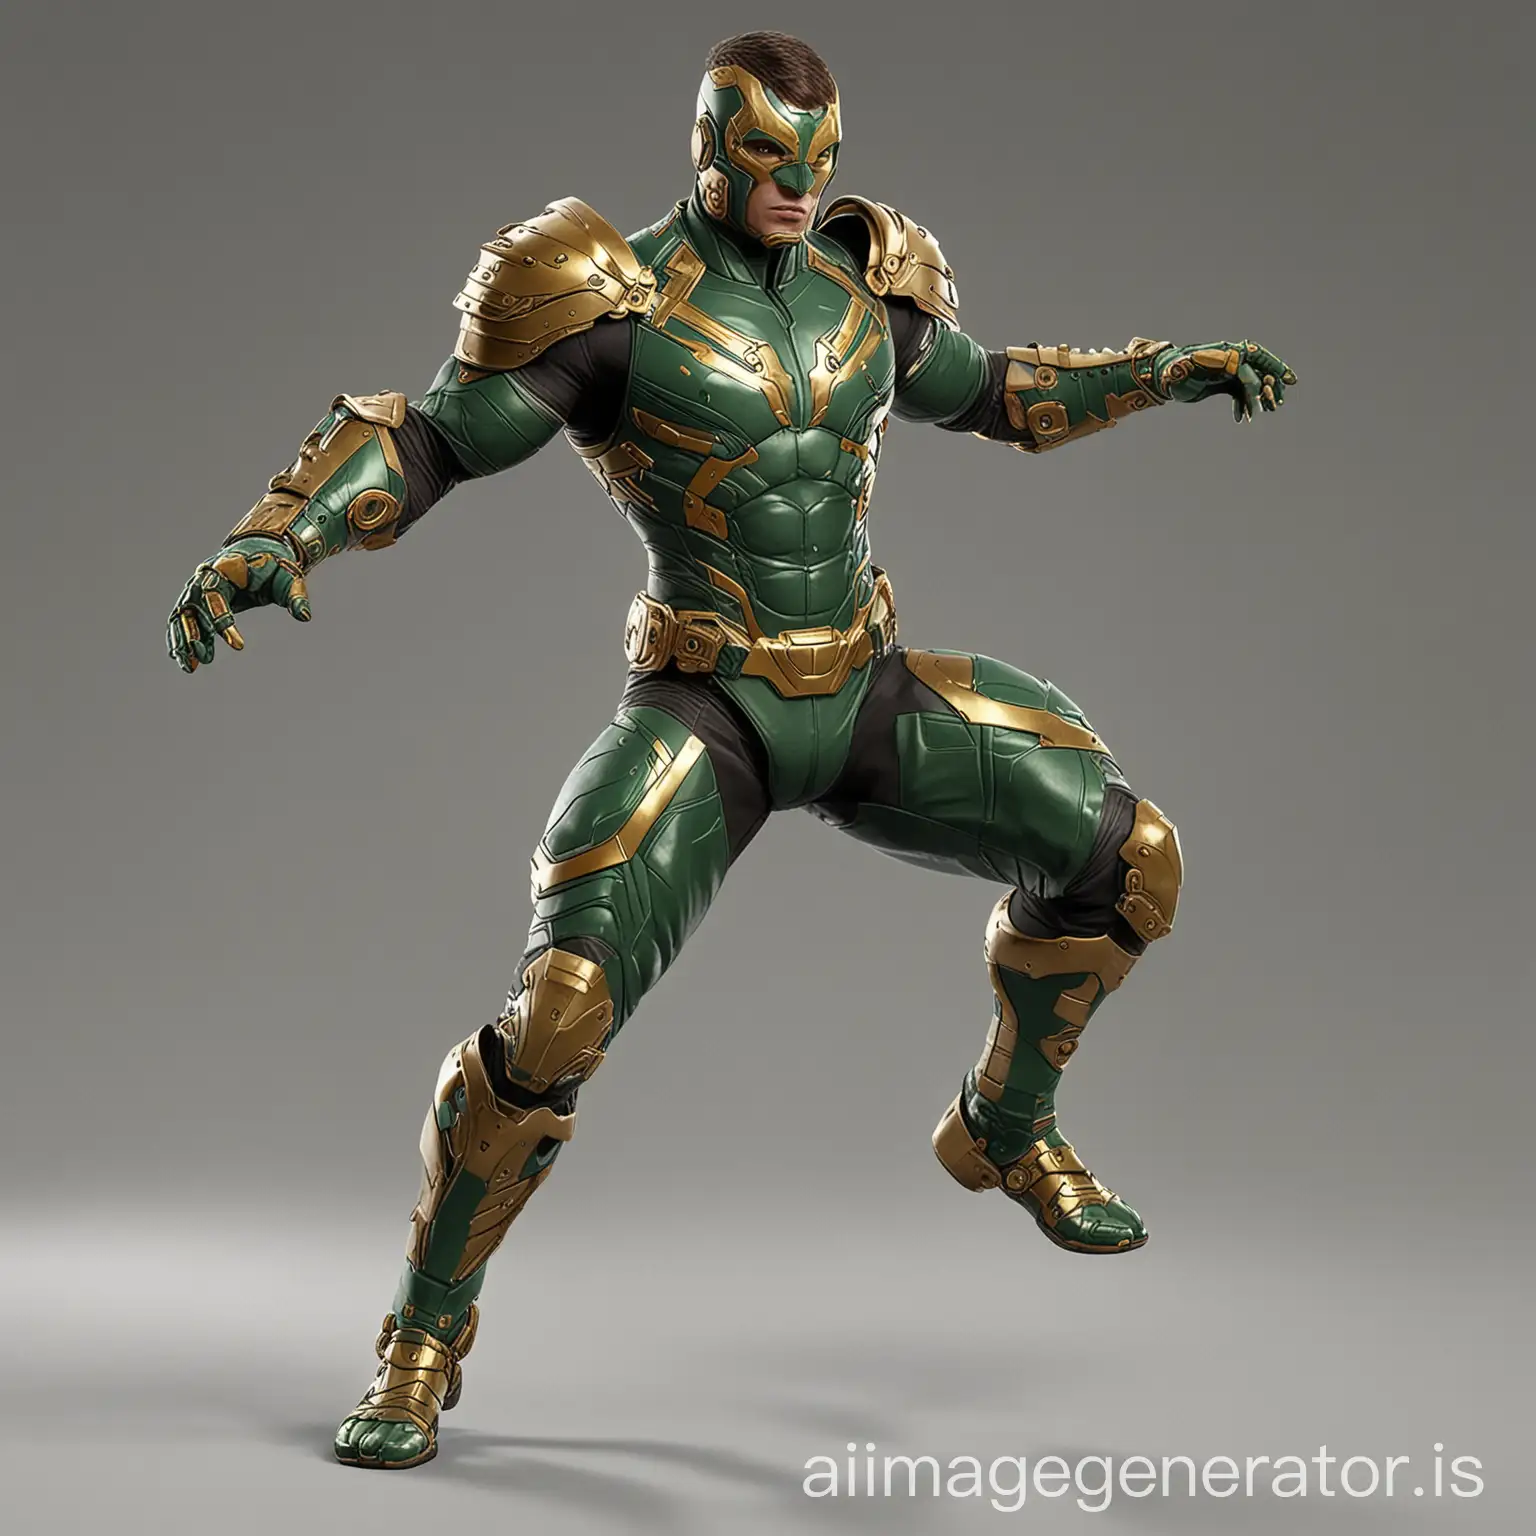 COMBAT POSE ENERGY BANDS 6,4 FT, MUSCULAR_THIN MALE _SUPERHERO_WITH_ARMOR GREEN OPEN BROWN HAIR VIEW FACEMASK GREEN, HARNESS_AND_BRACELET,REALISTIC GOLD FOREARM GREEN SUIT _HI_TECH_ARMOUR SUIT_WITH_ARMS_OUT_CAMELEON COLOR__3___1 POSE IN ACTION, COMBAT POSE